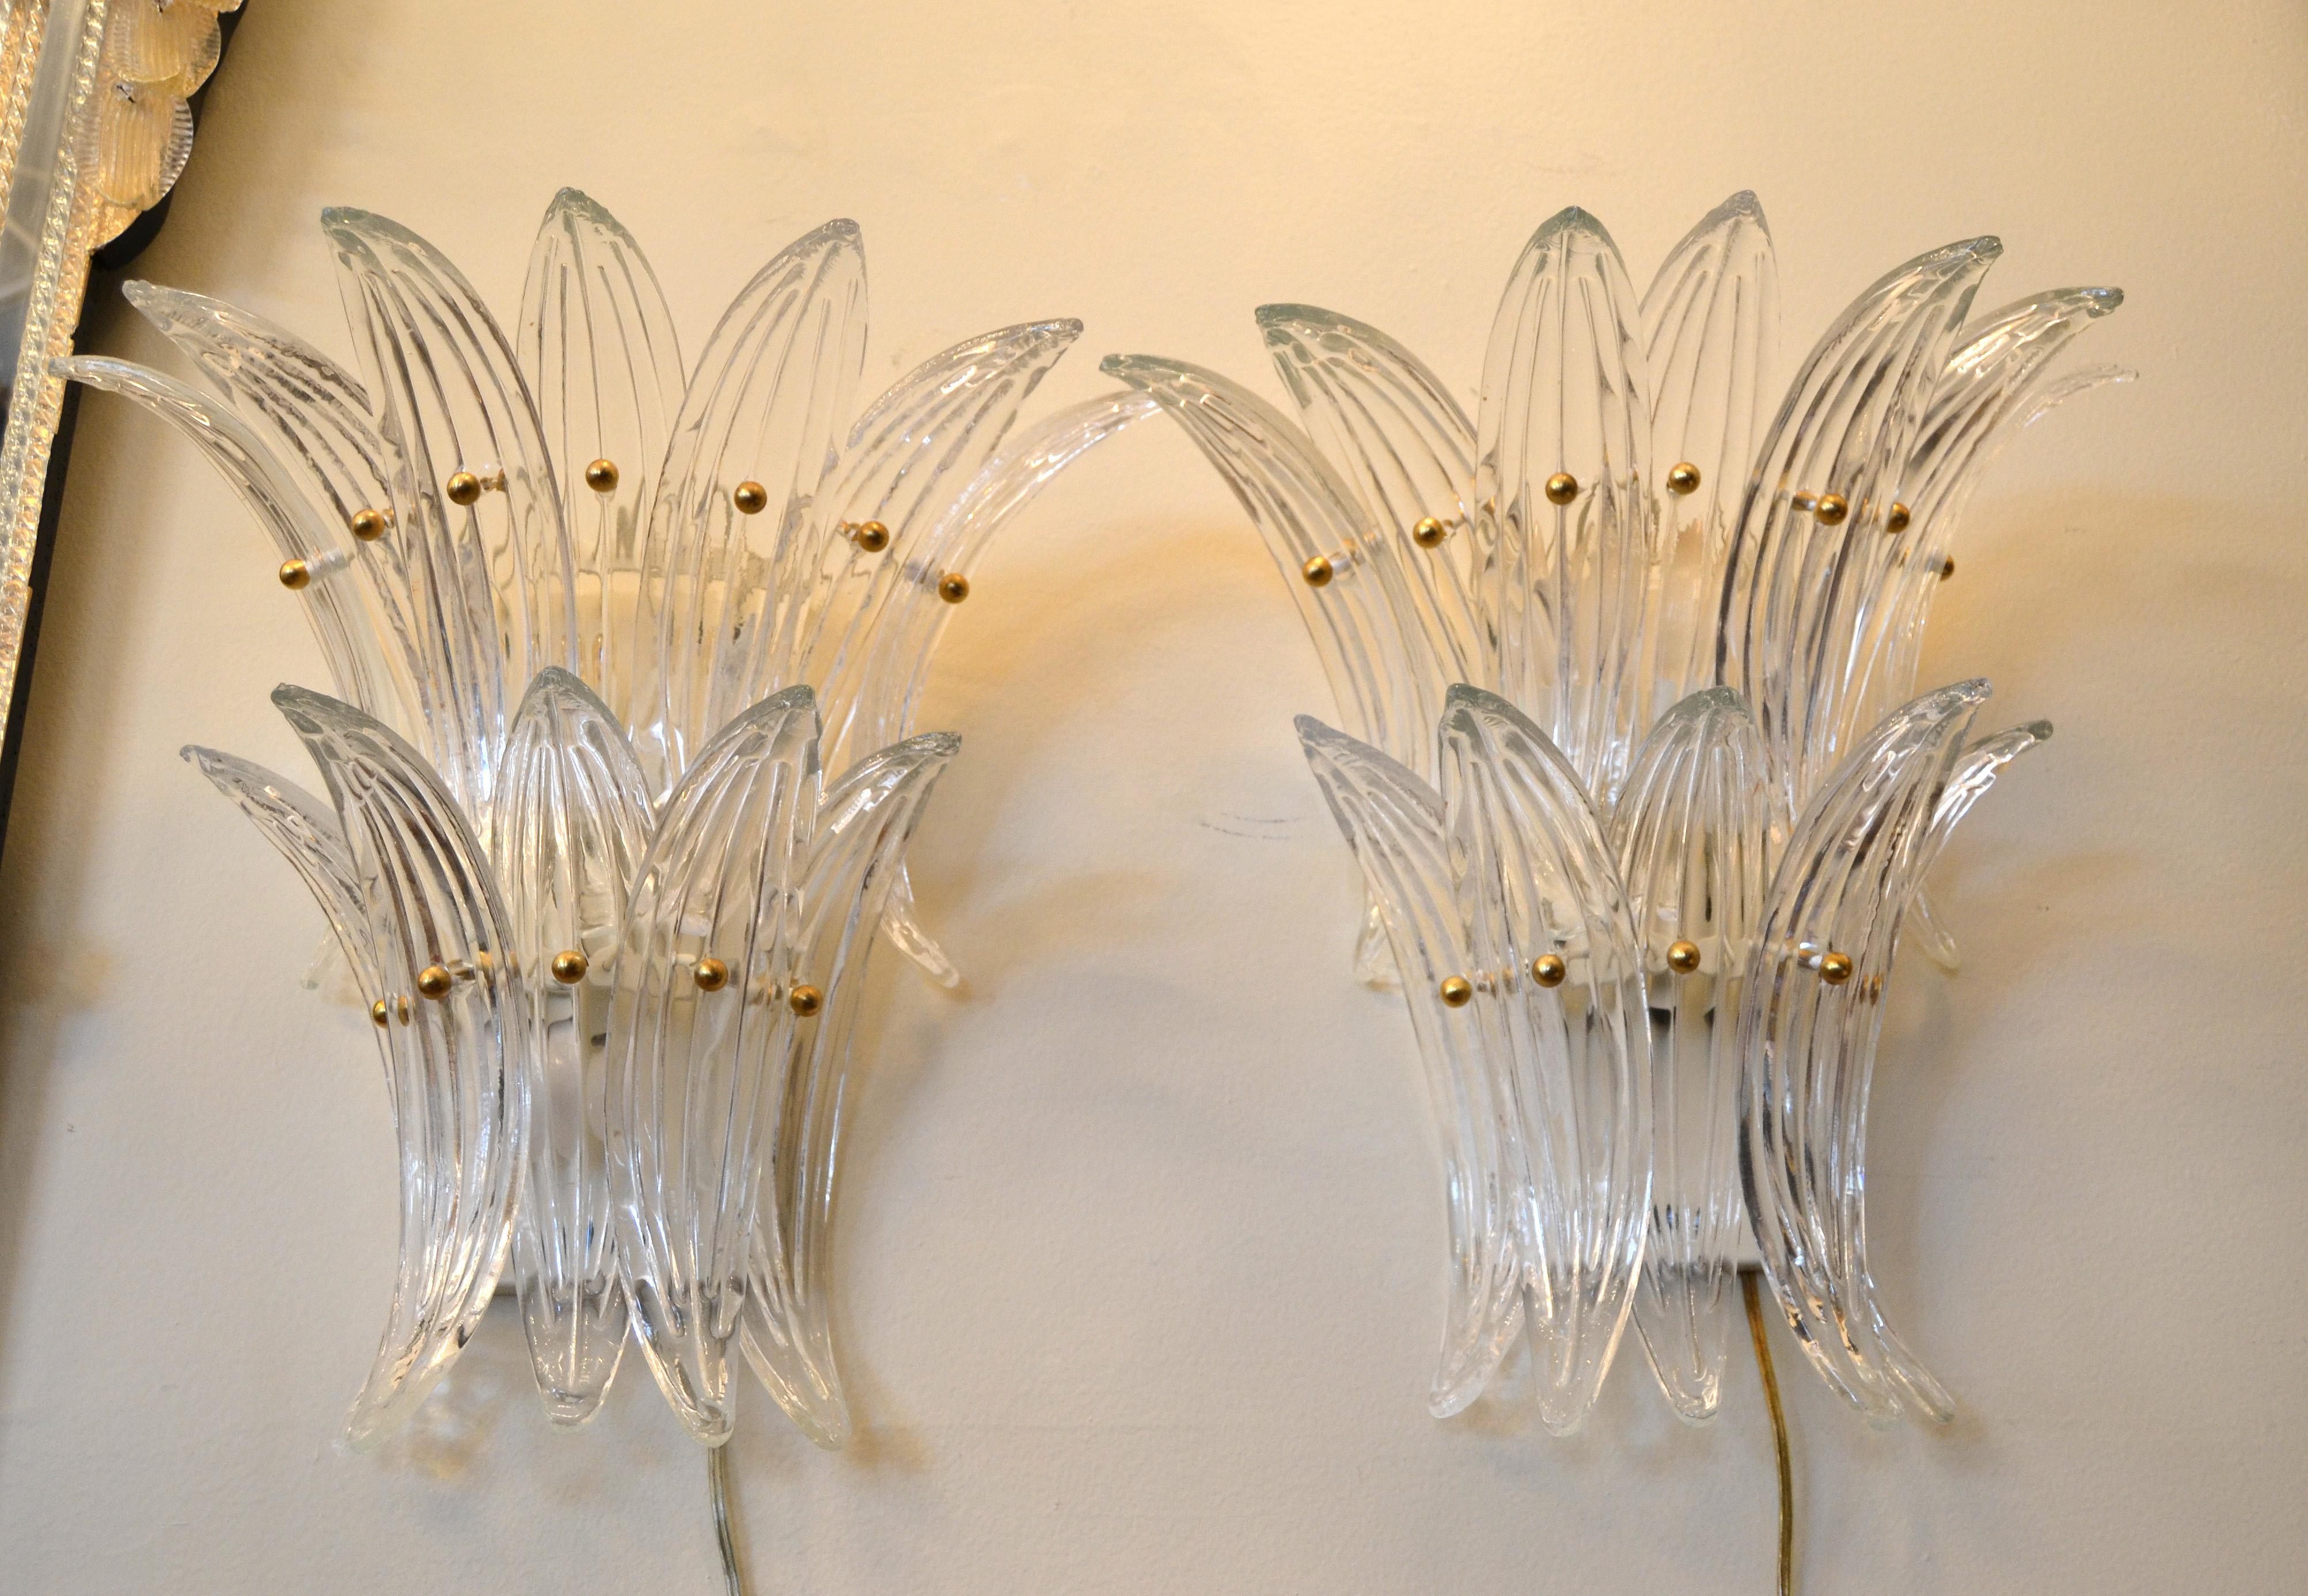 A pair of murano blown glass ornaments sconces which resembles the fan-shaped leaves of a palm tree, made in Italy.
The glass leaves are mounted on a metal frame and fastened with round brass screws.
Each sconce has 12 glass ornaments and uses 3